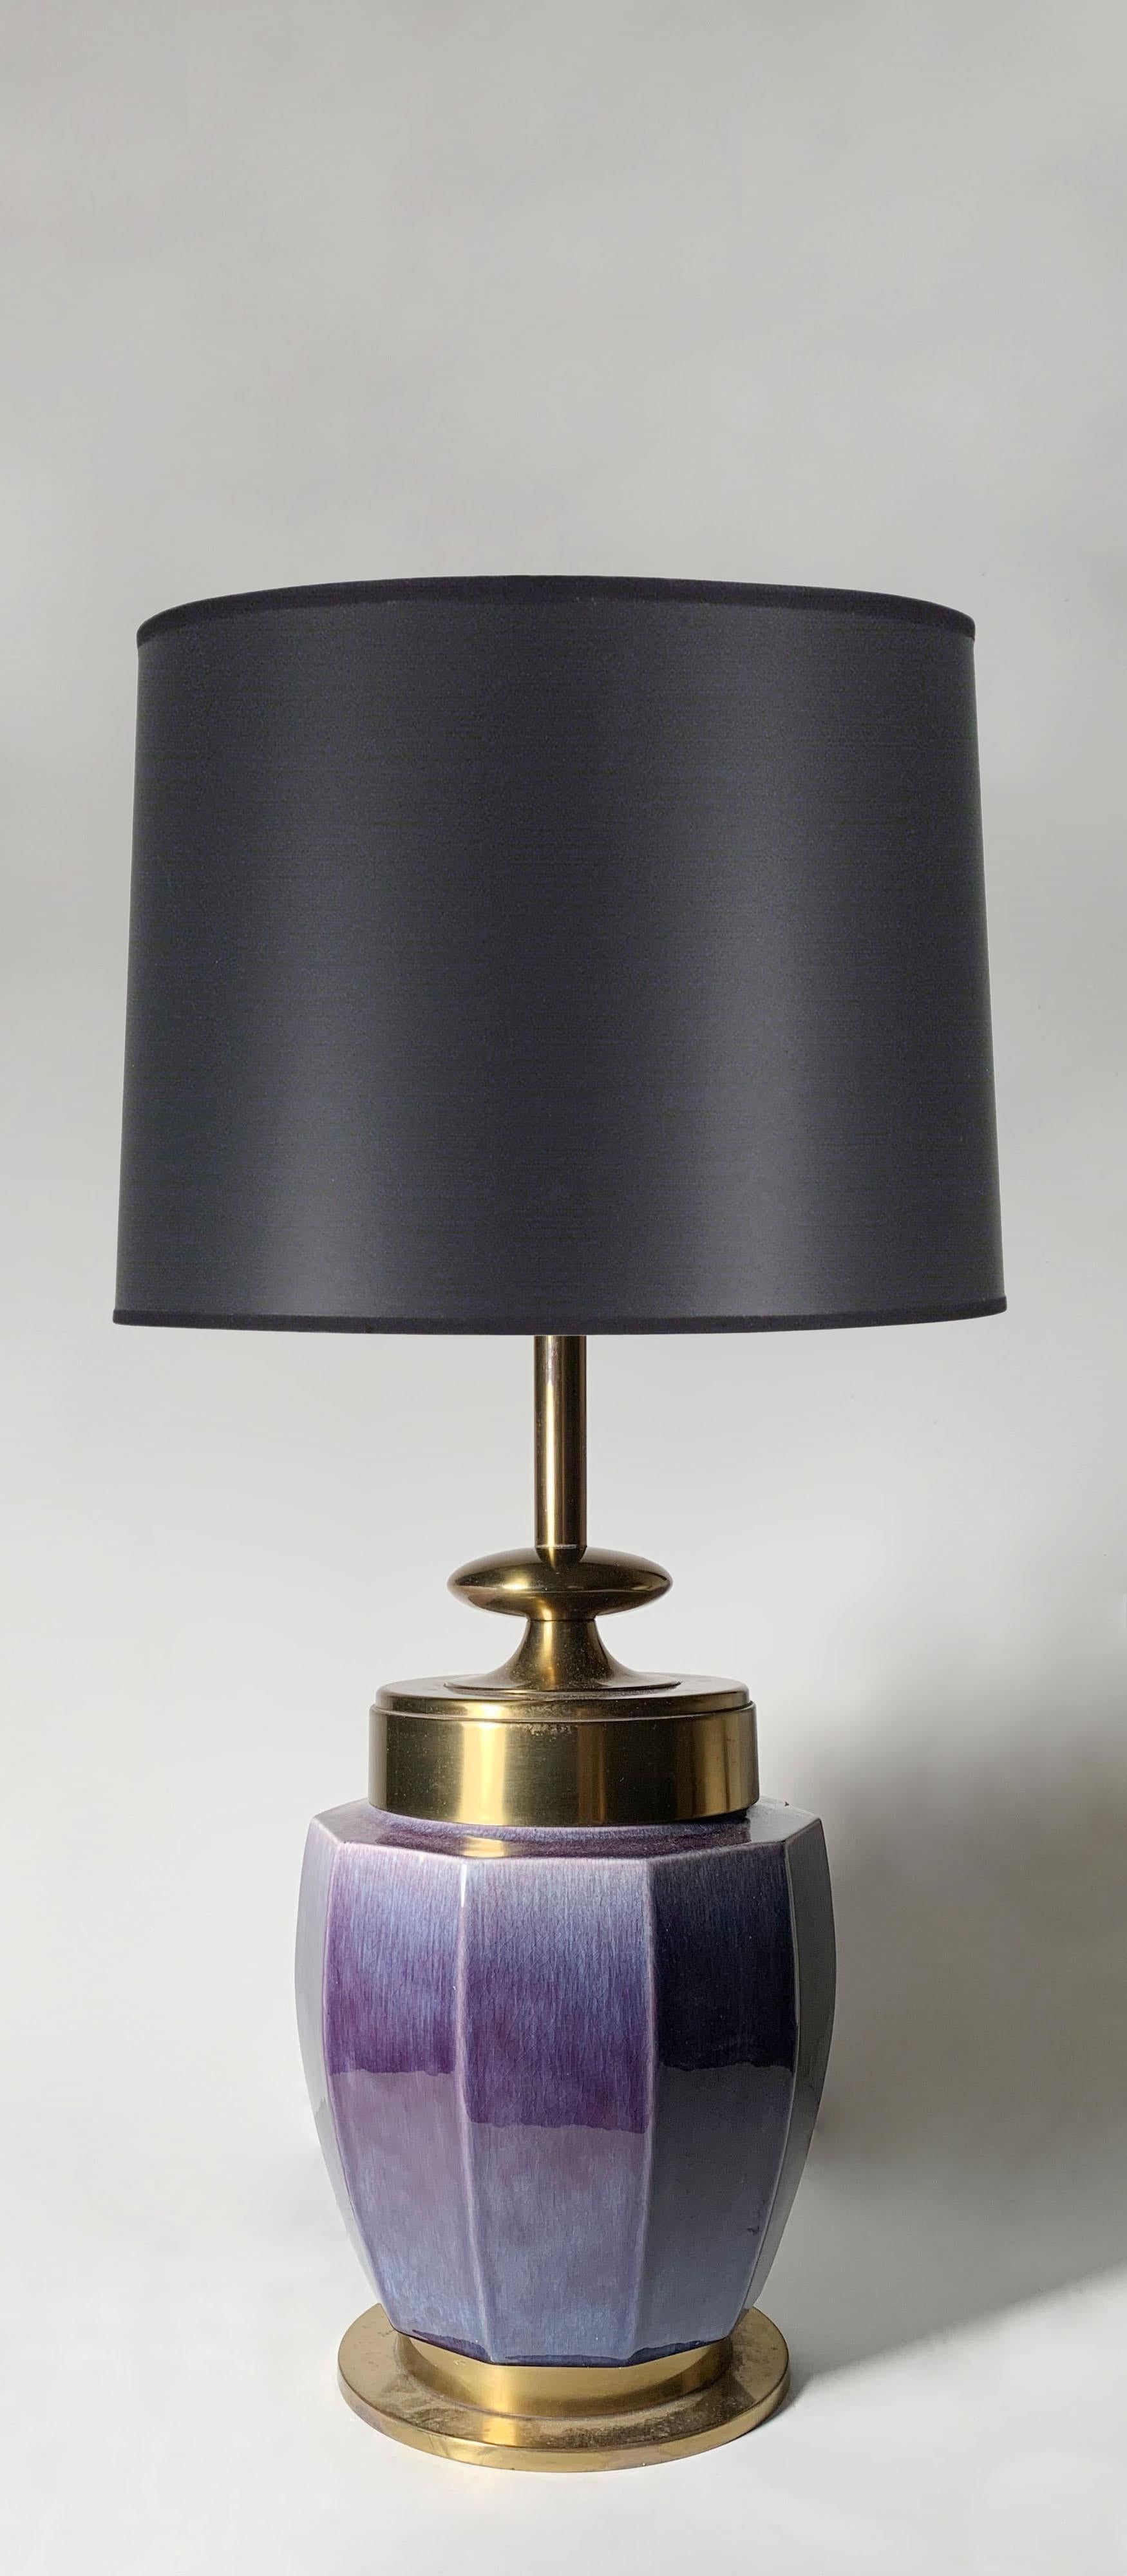 Large Vintage Hollywood Regency Stiffel ceramic Lamp. Style of Tommi Parzinger. A beautiful purple glaze on this ceramic base.

some vintage wear. Some wear to the finish of the brass hardware. A minor knick on ceramic.